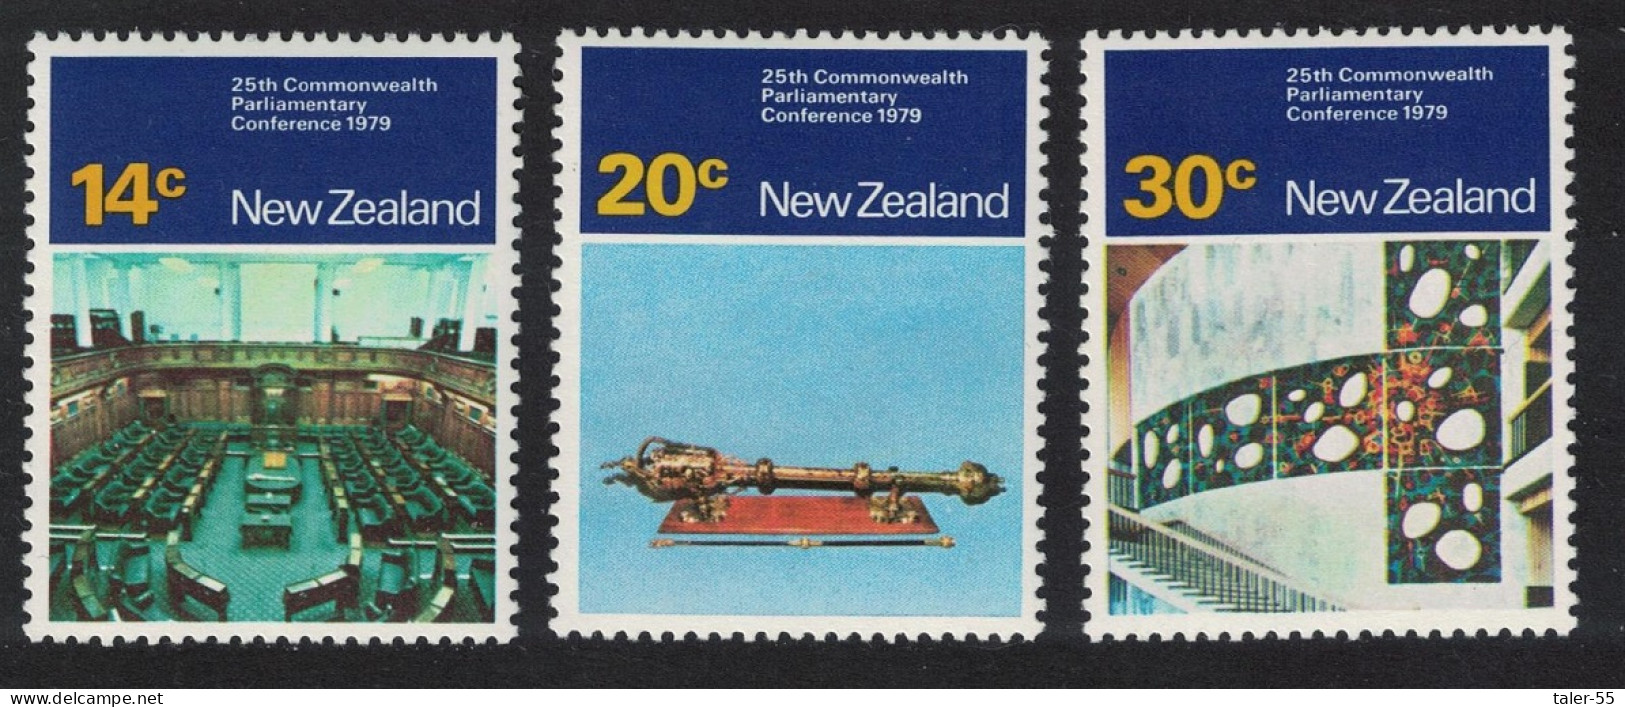 New Zealand Parliamentary Conference 3v 1979 MNH SG#1207-1209 - Unused Stamps